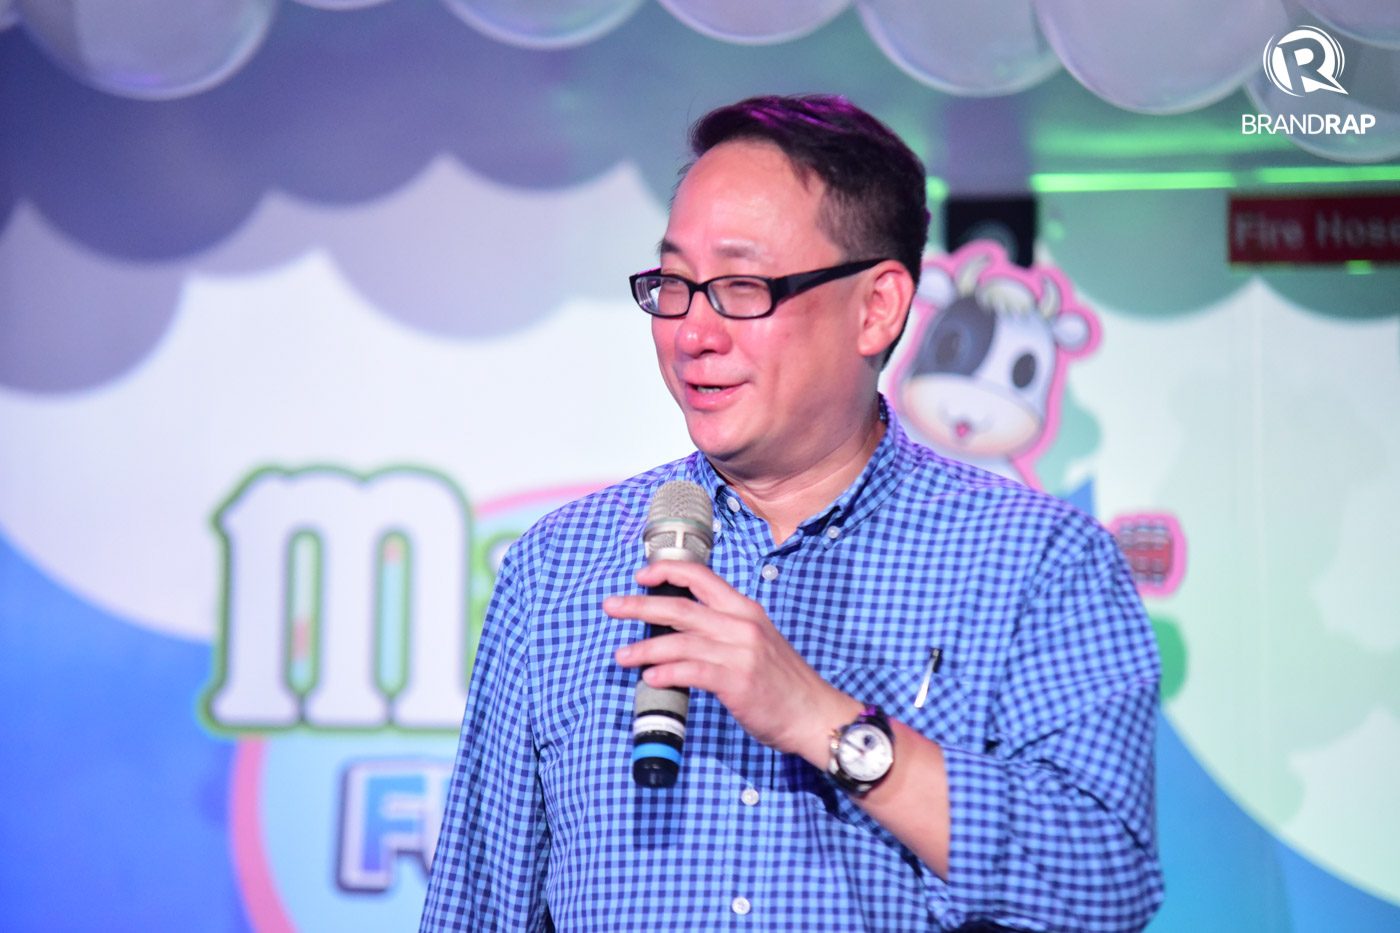 GRATITUDE. Edwin Ong, Milkita’s Chief Executive Officer, opened the program by saying thanks to the event’s participants and sponsors 